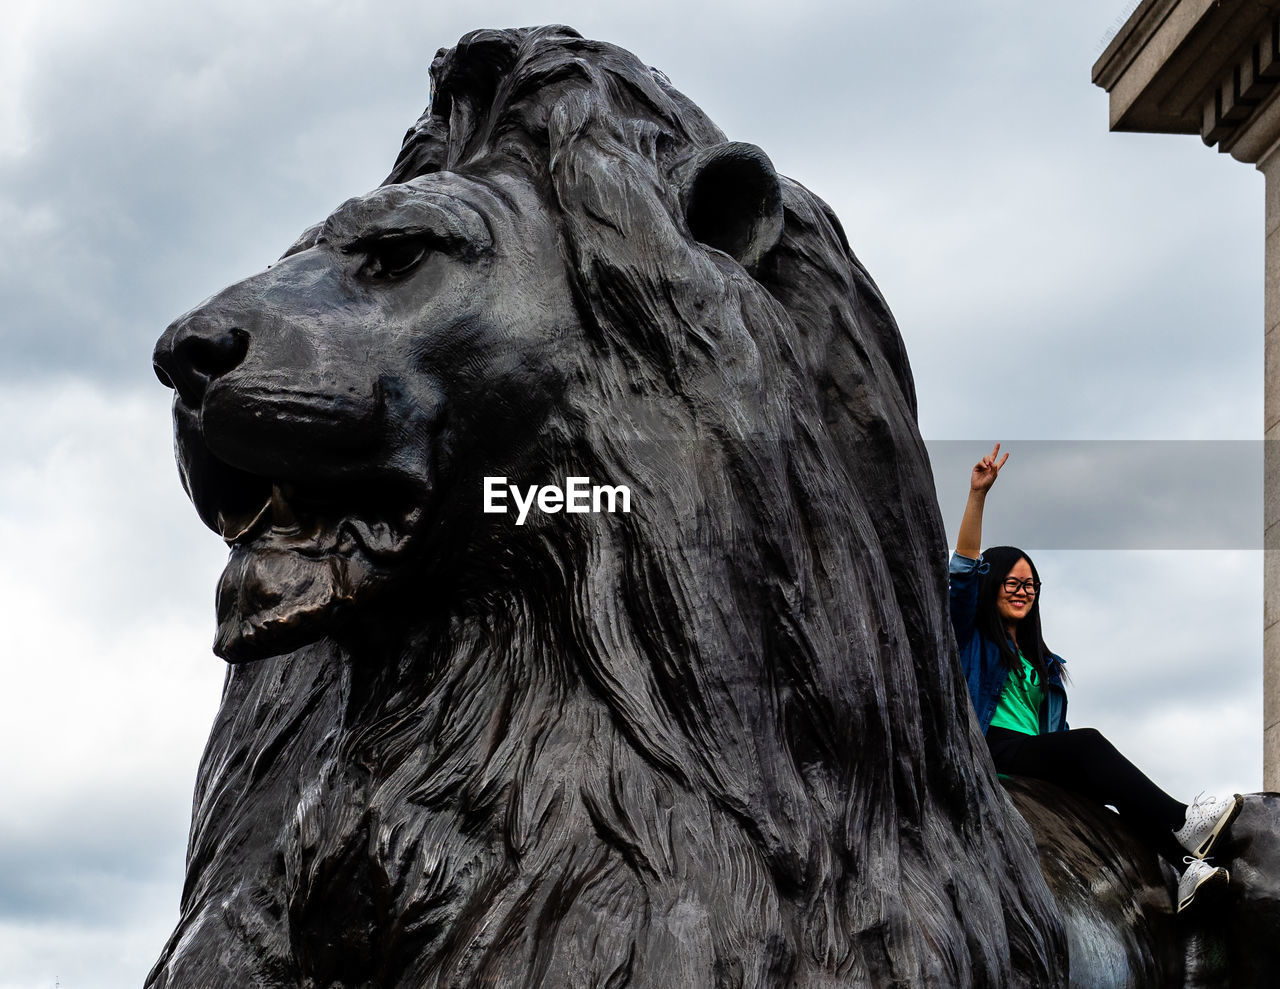 Tourist woman on lion statue in london